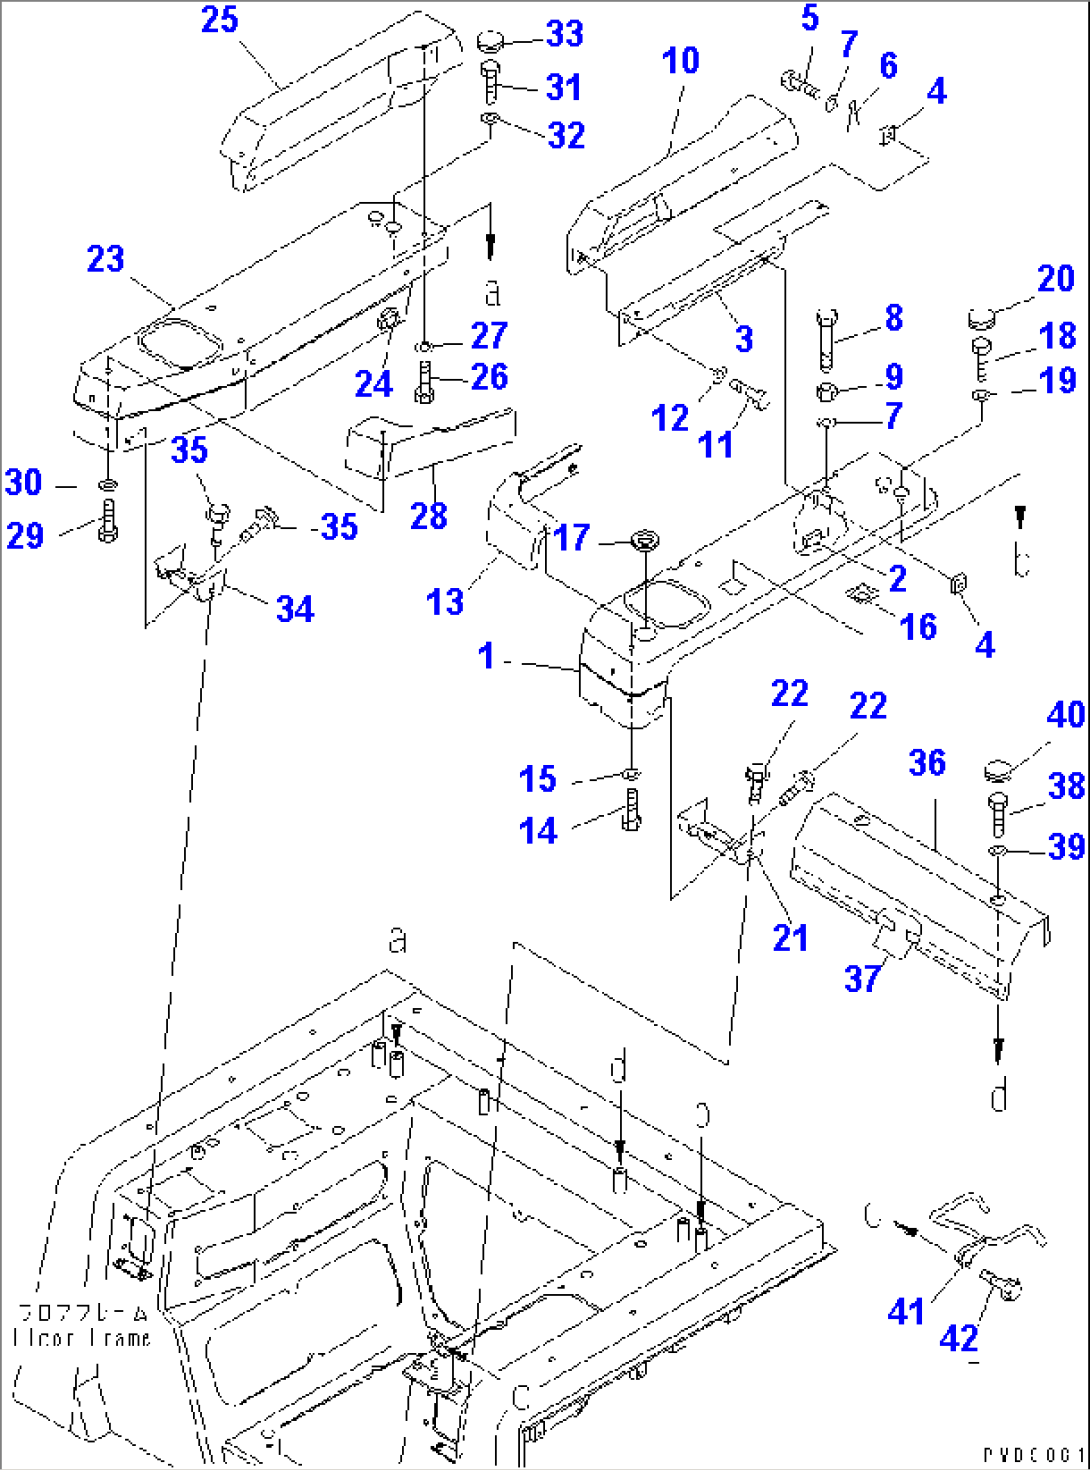 ARM REST (WITHOUT RIPPER) (WITH GUIDE)